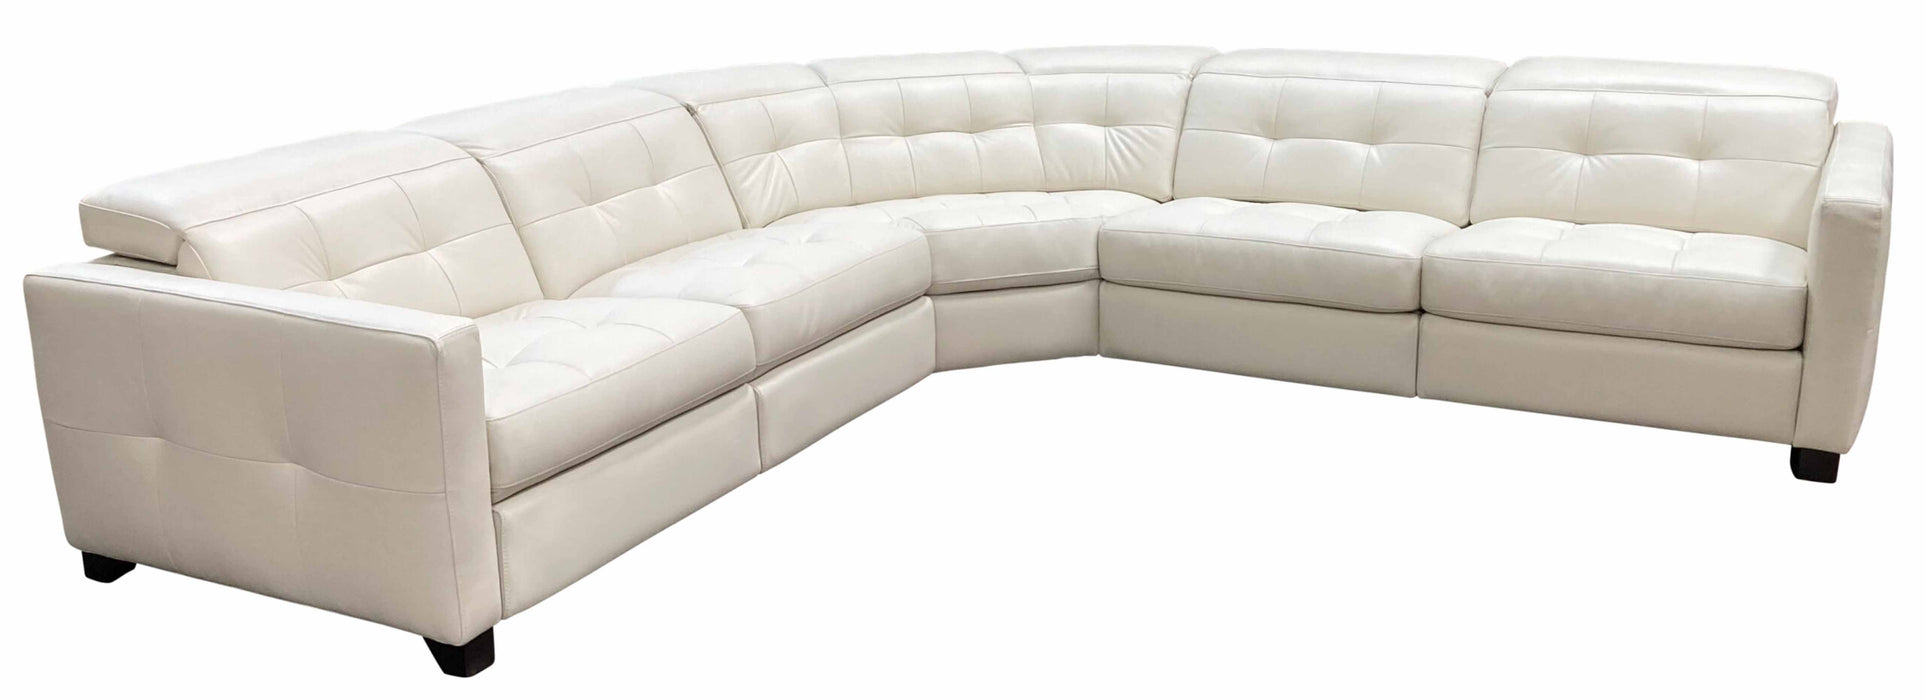 Sardinia Leather Power Reclining Sectional With Articulating Headrest | American Style | Wellington's Fine Leather Furniture